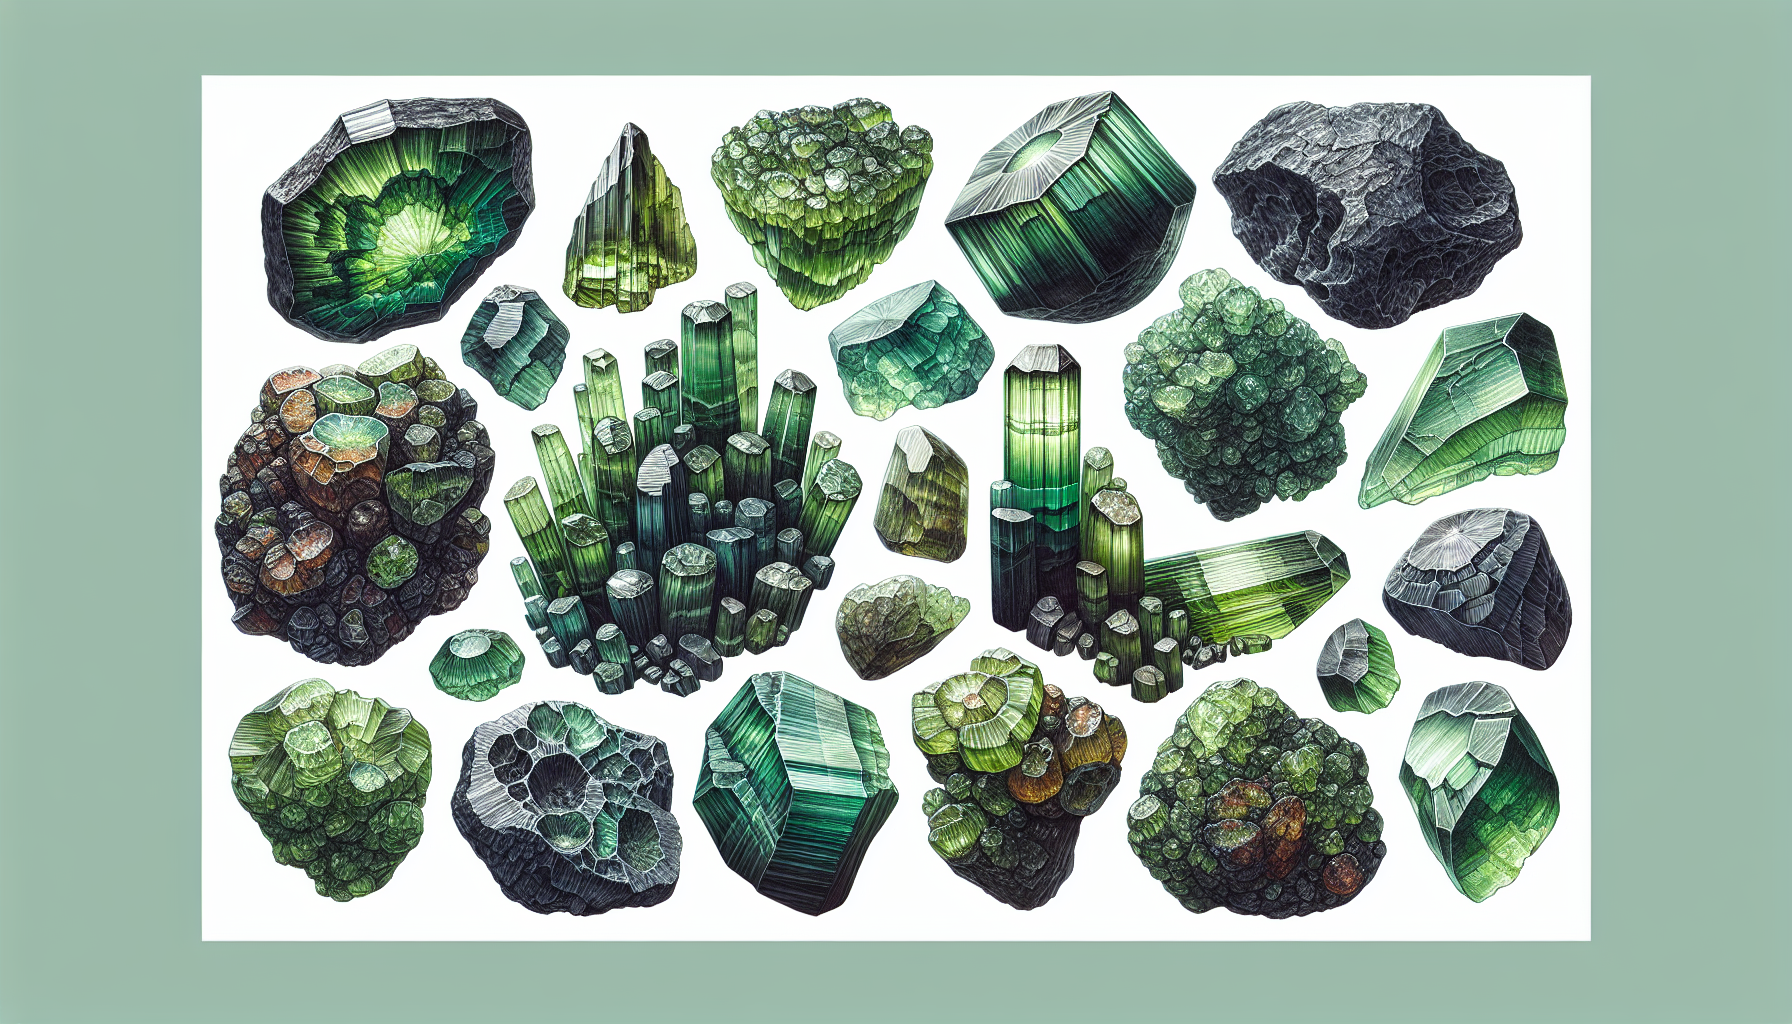 Illustration of moldavite specimens with varying textures and colors